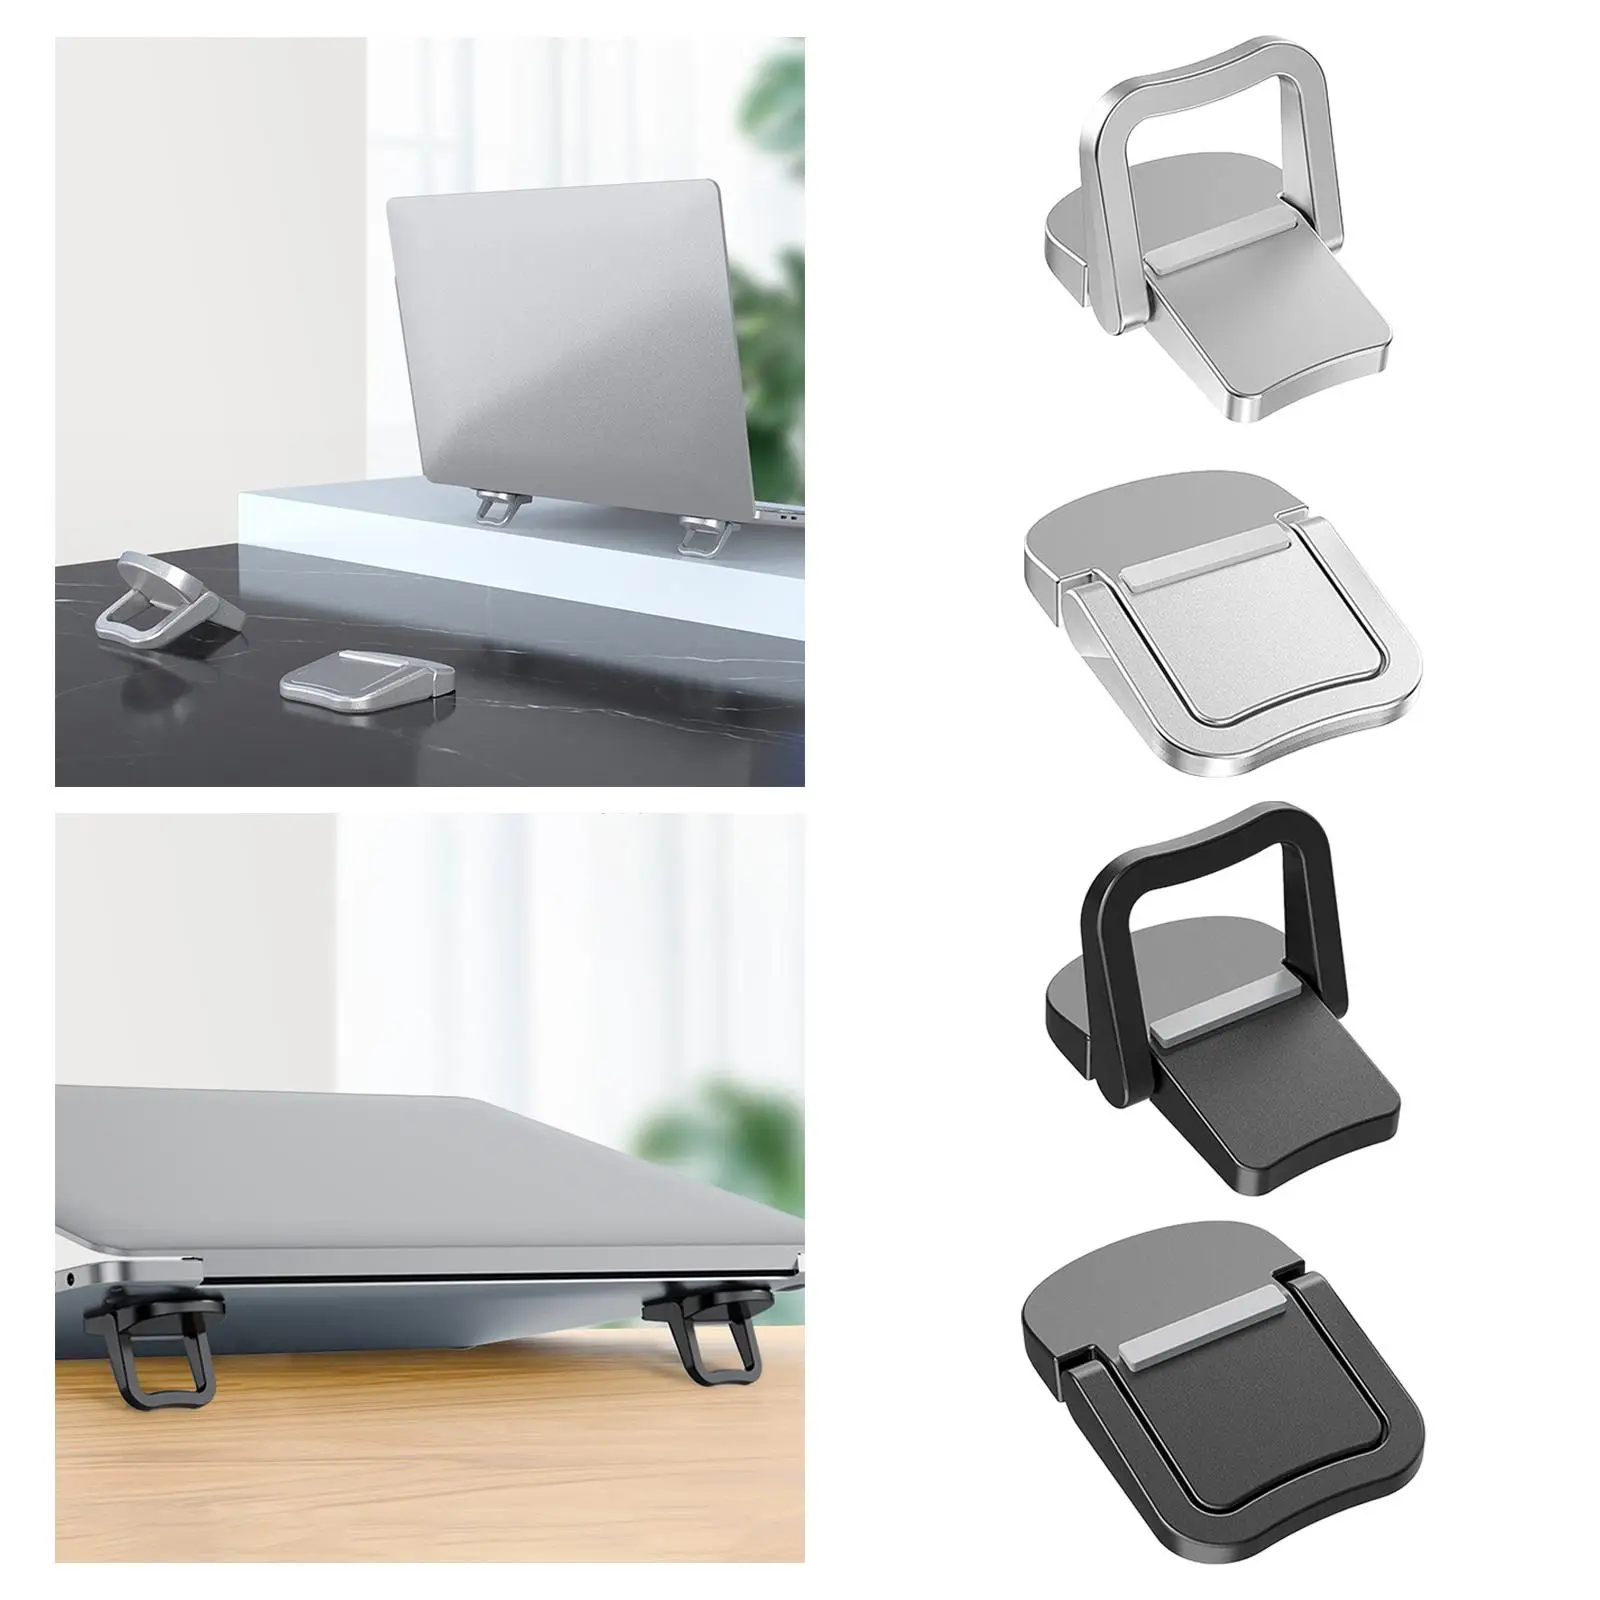 2 Pieces Portable Laptop Stand Laptop Feet Nonslip Base Self Adhesive Heat Dissipation Computer Kickstand for Desk Travel Home